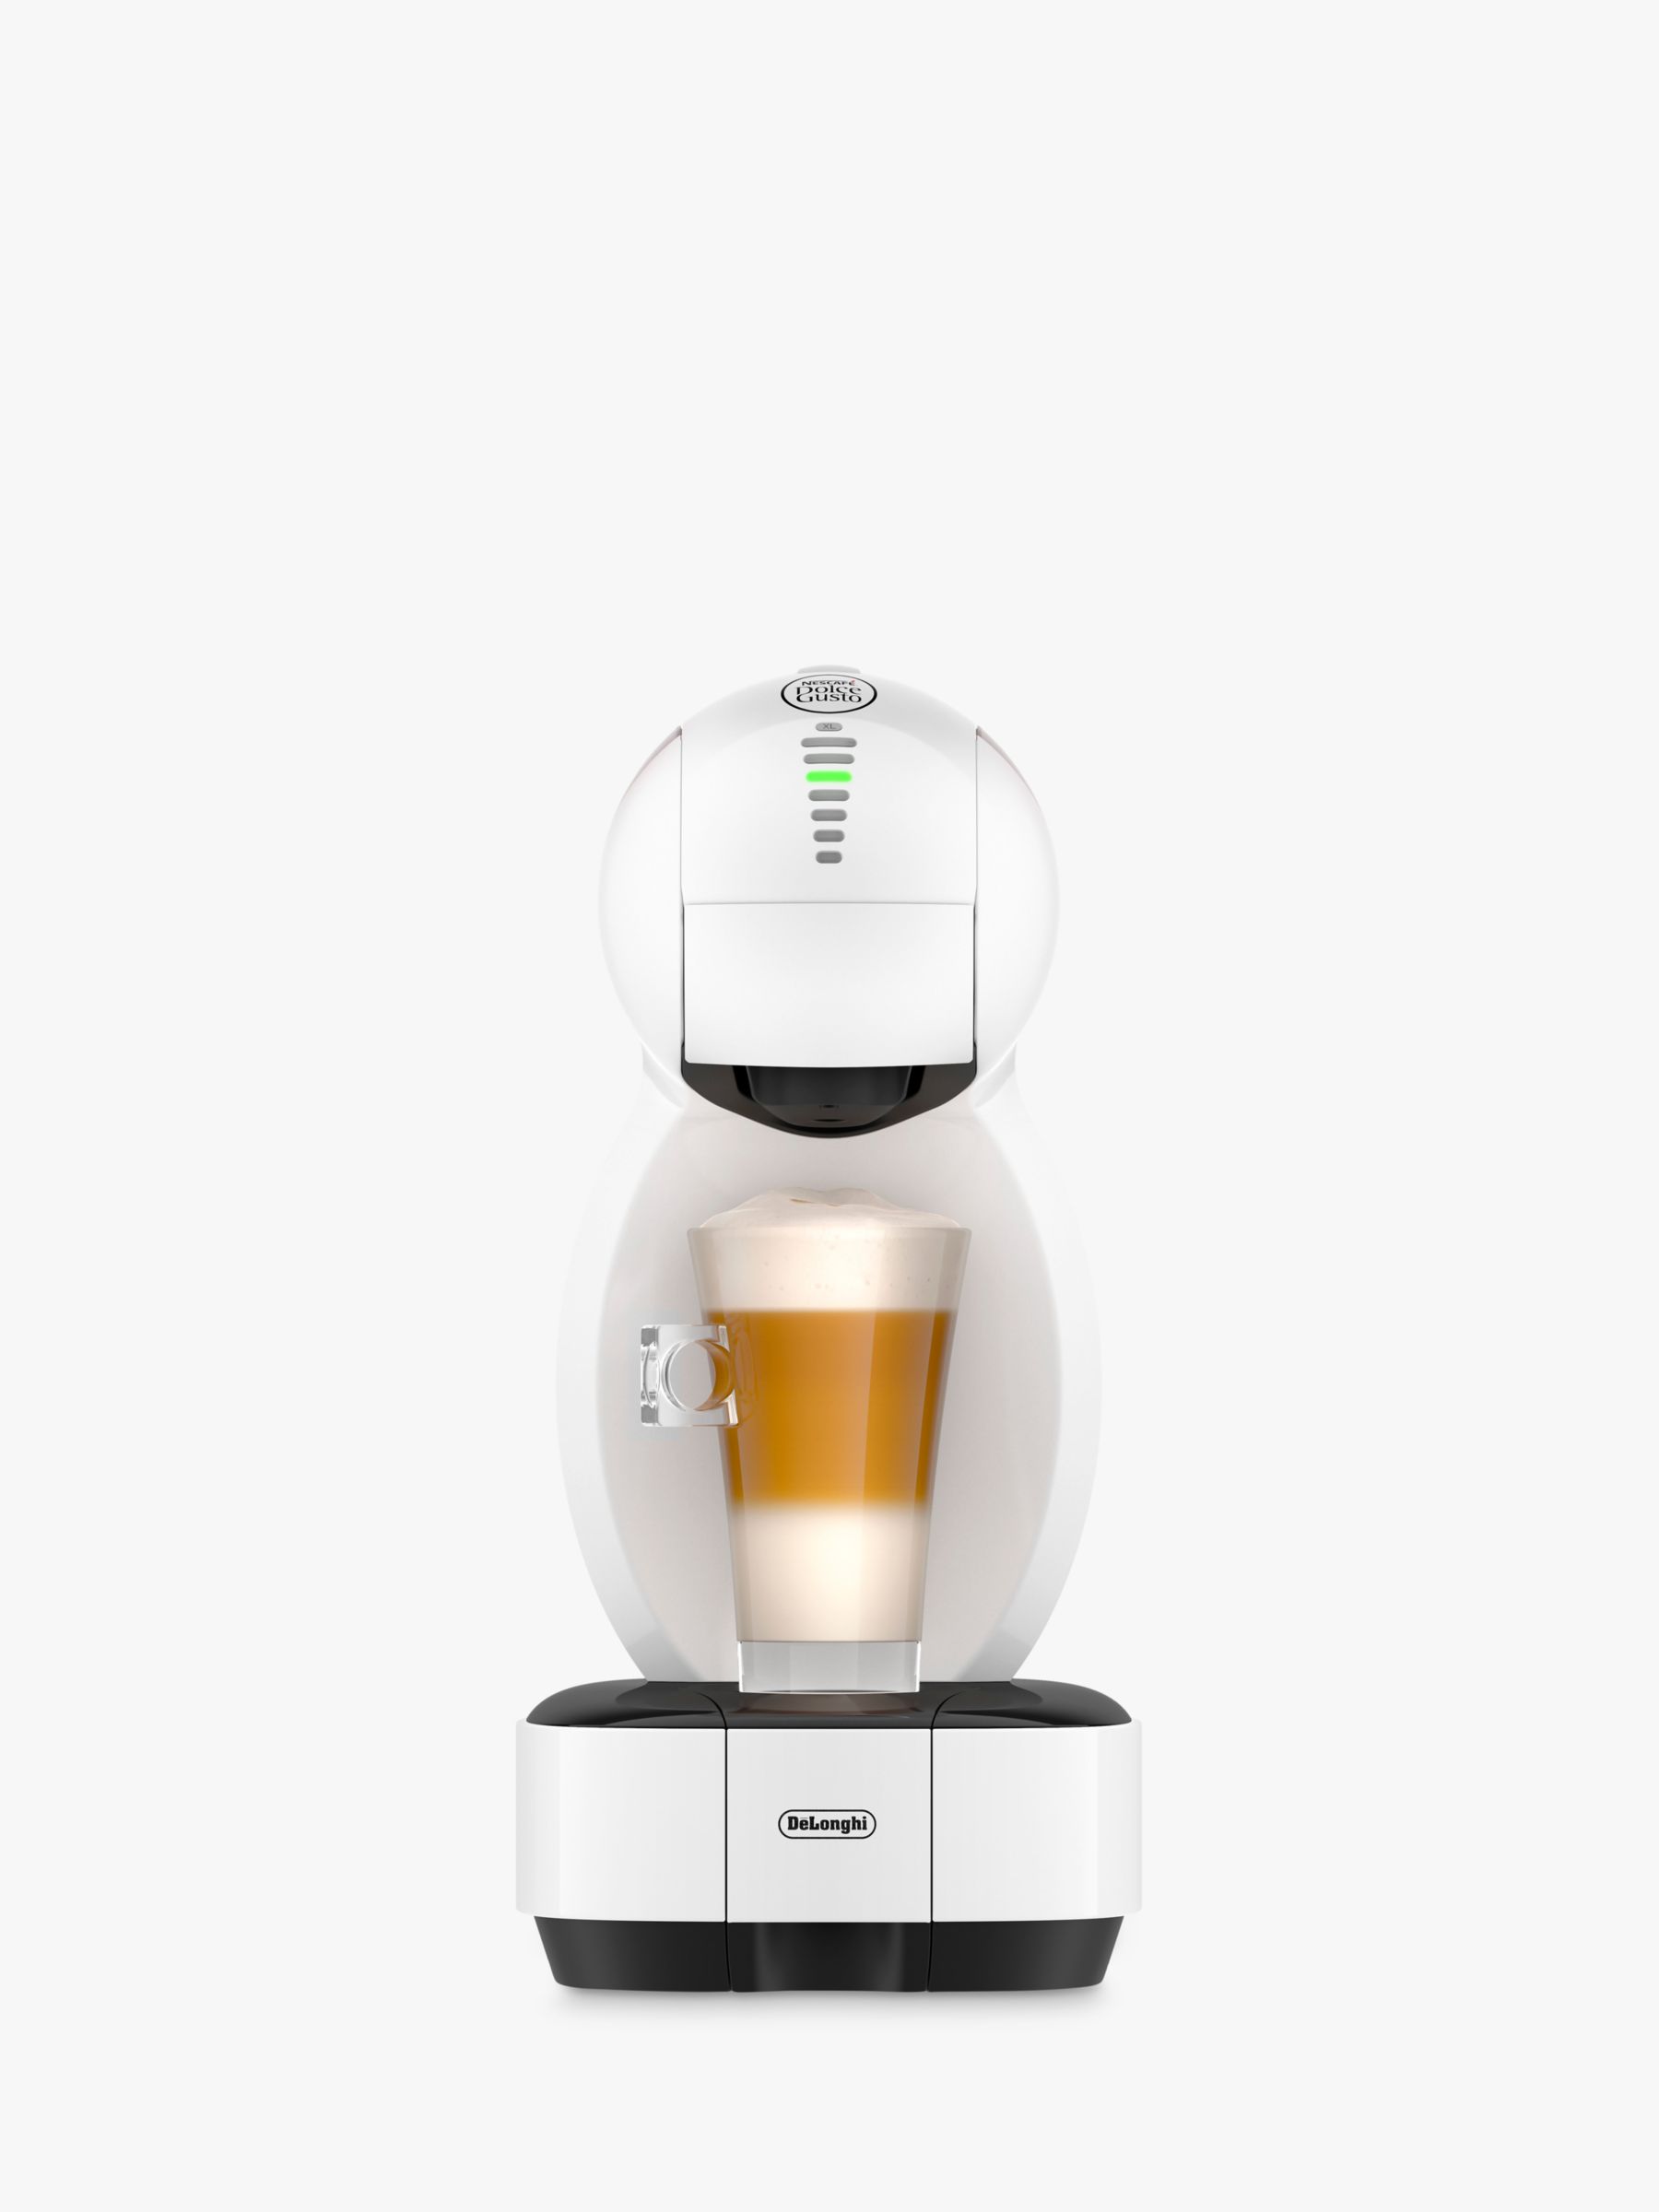 DeLonghi U vs Krups Dolce Gusto Piccolo: What is the difference?